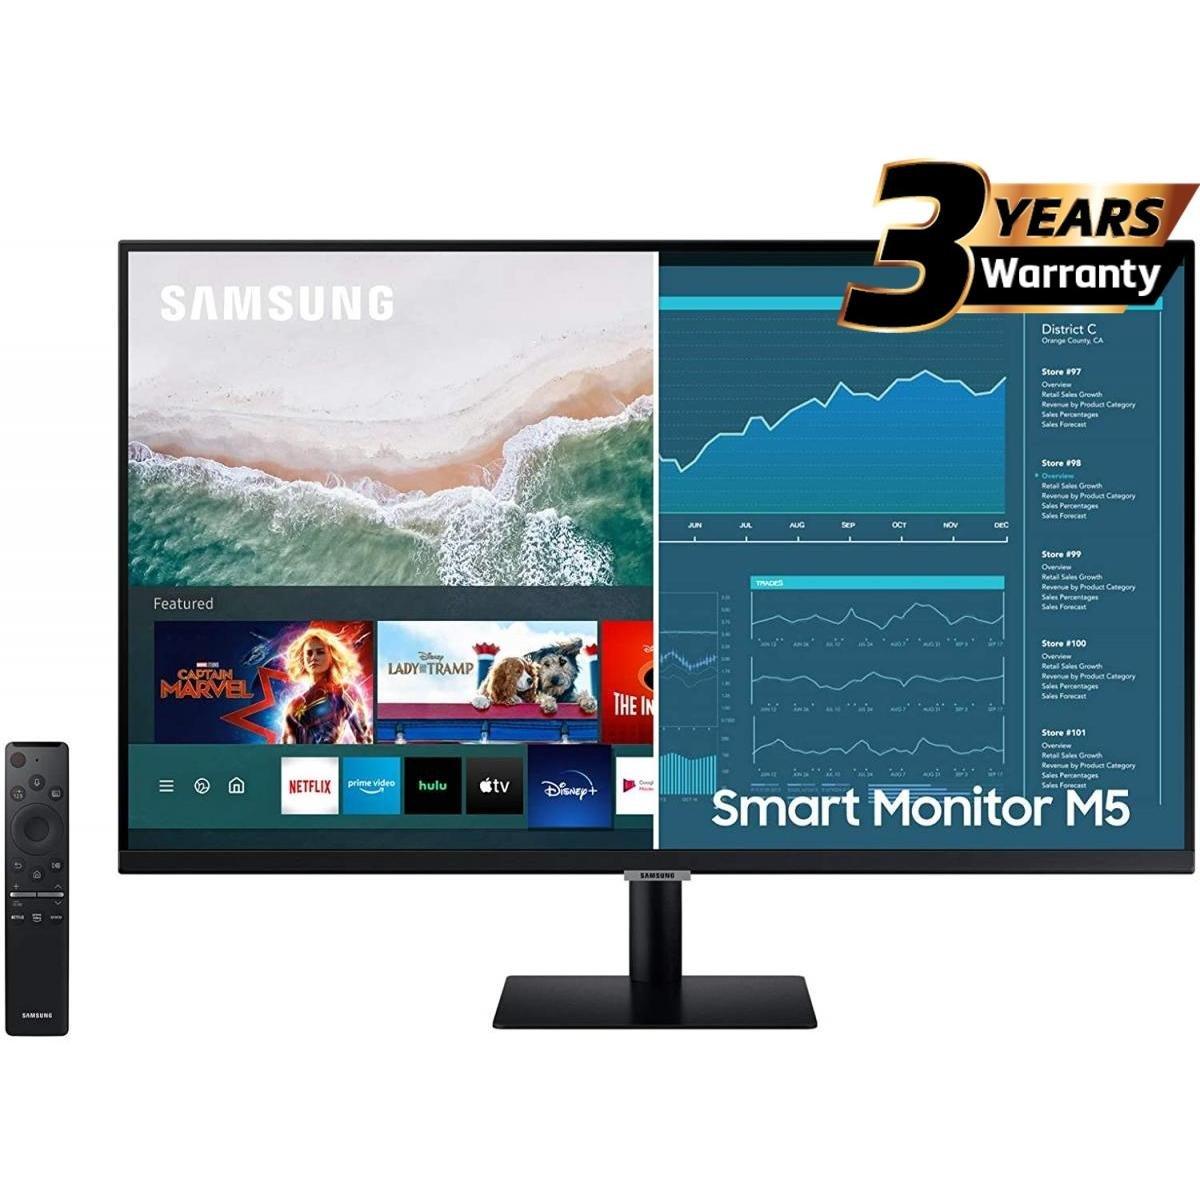 SAMSUNG Computer Monitors Black SAMSUNG M5 32" FHD HDR10 Smart Monitor 4ms (GTG),1B Colors & USB Ports - with Netflix, YouTube & Apple TV Streaming - black or White